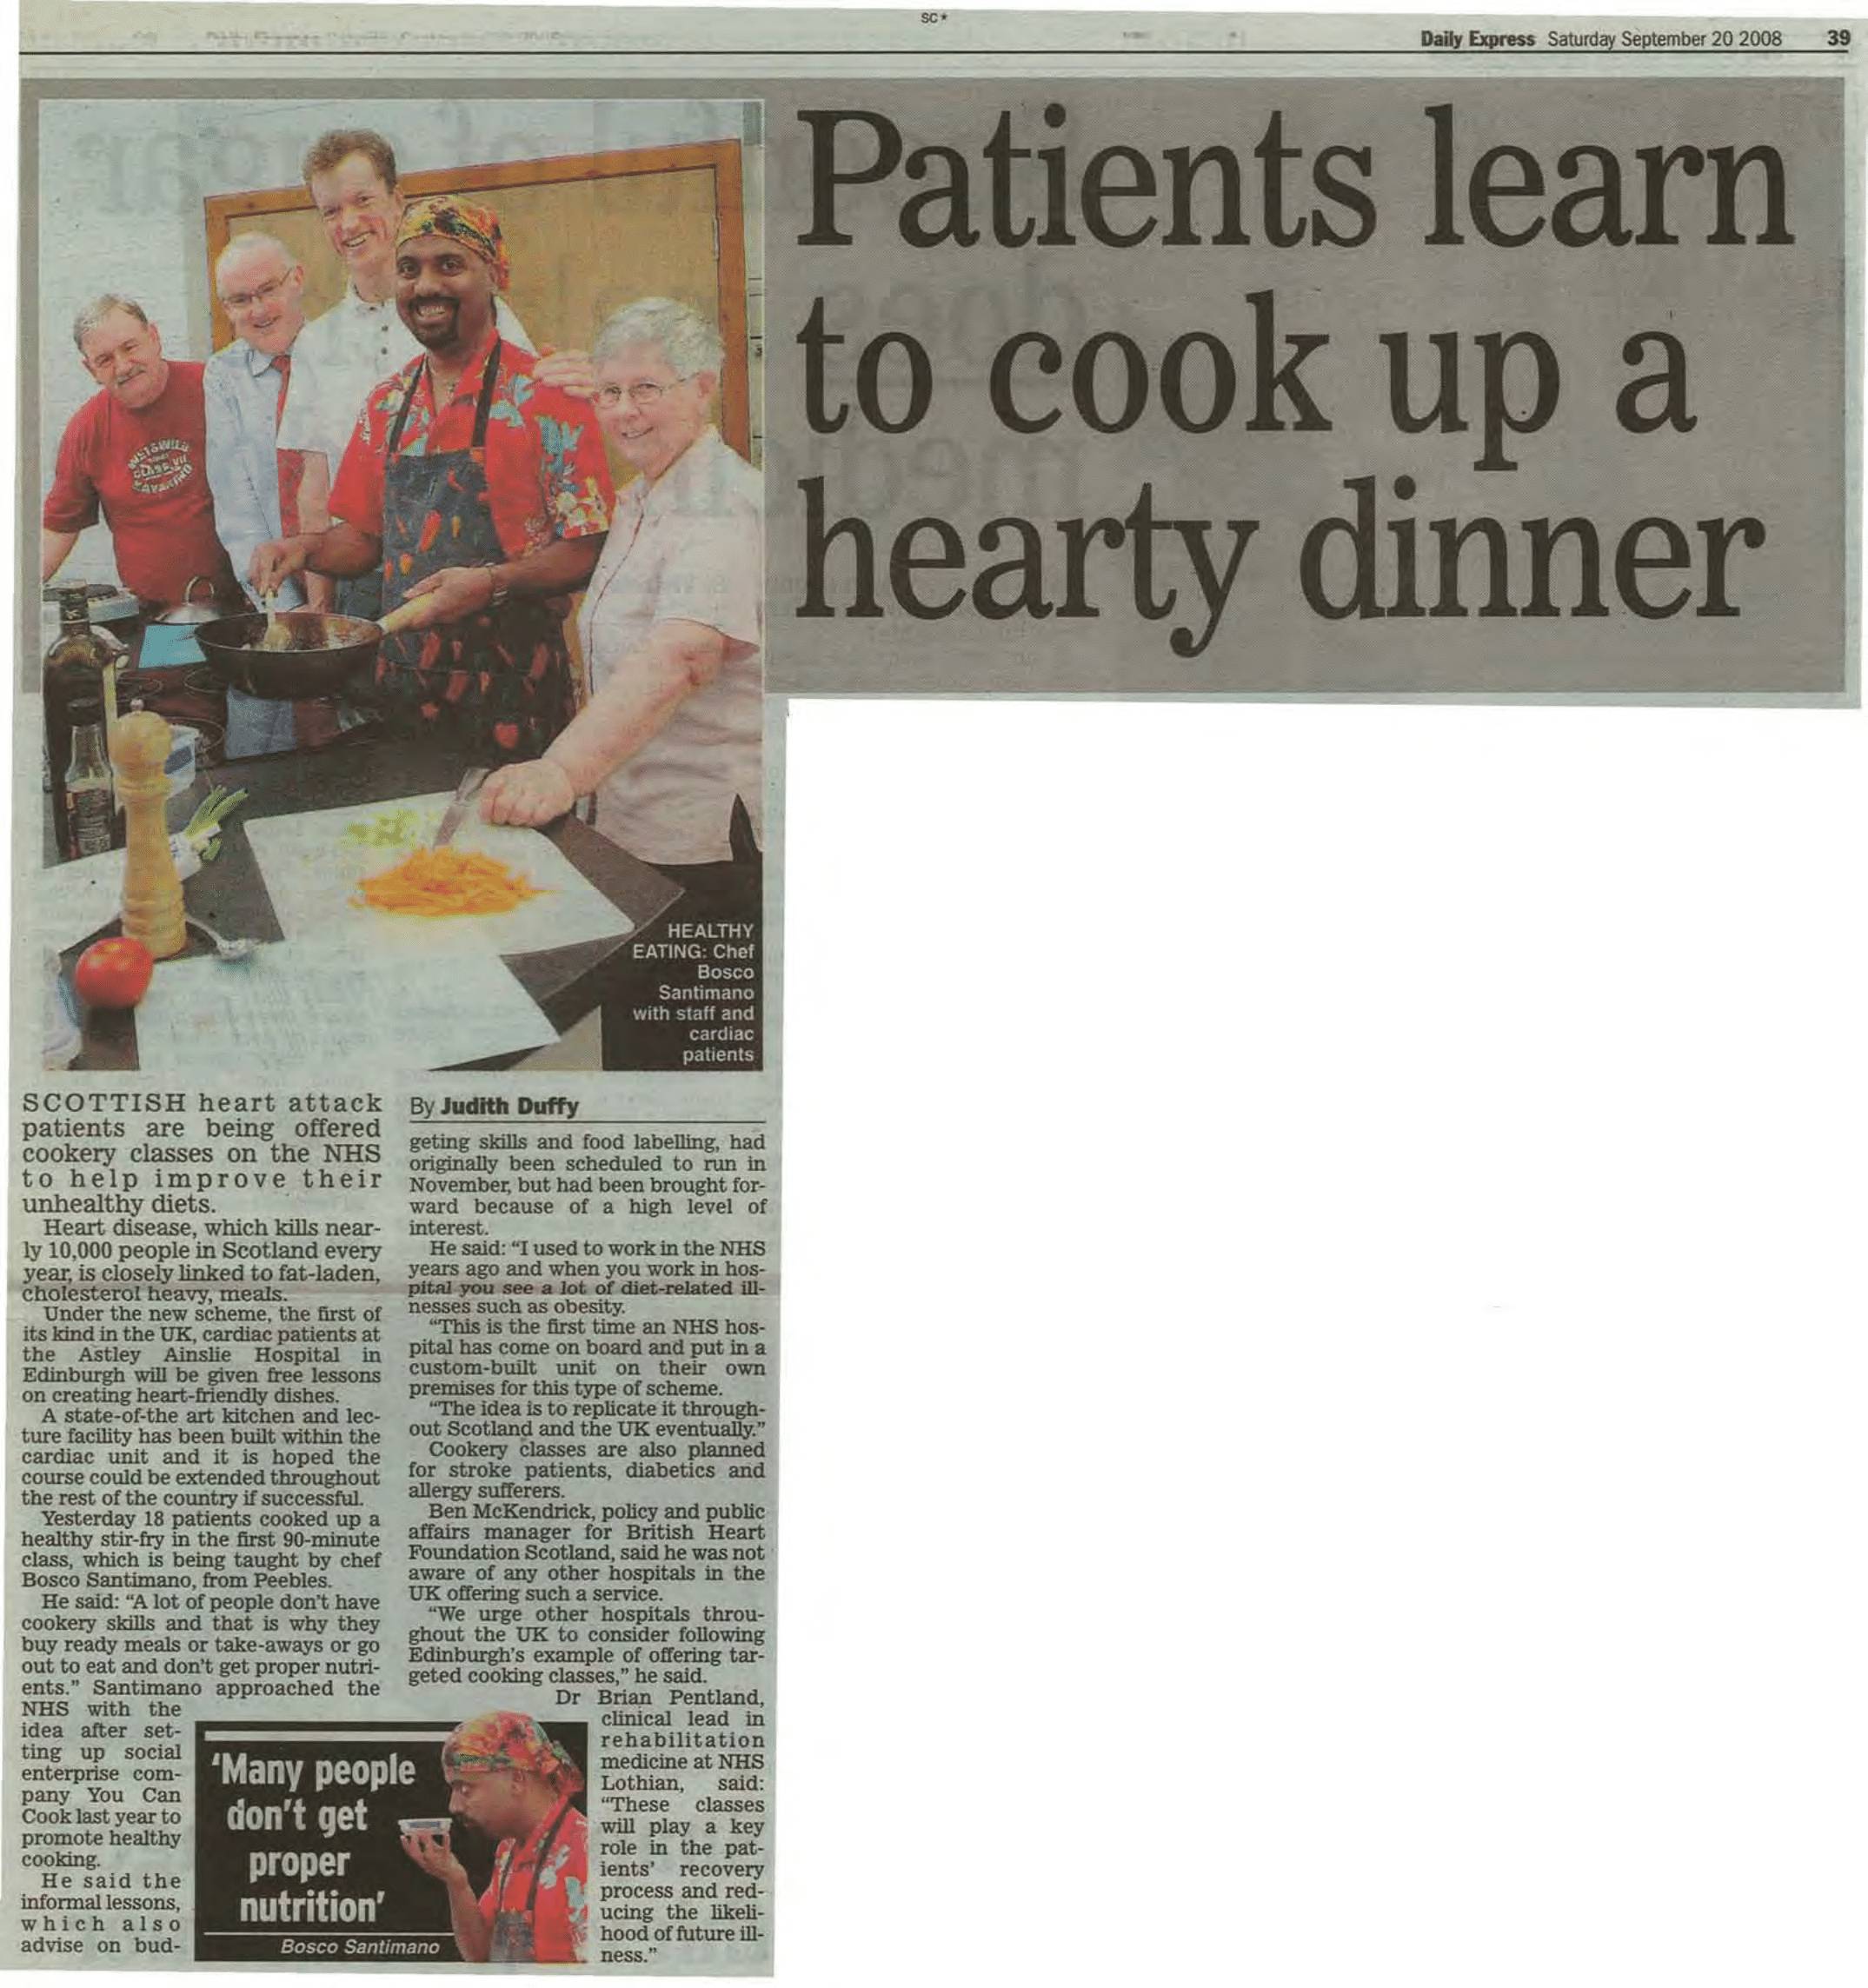 Press Clipping: Patients learn to cook up a hearty dinner